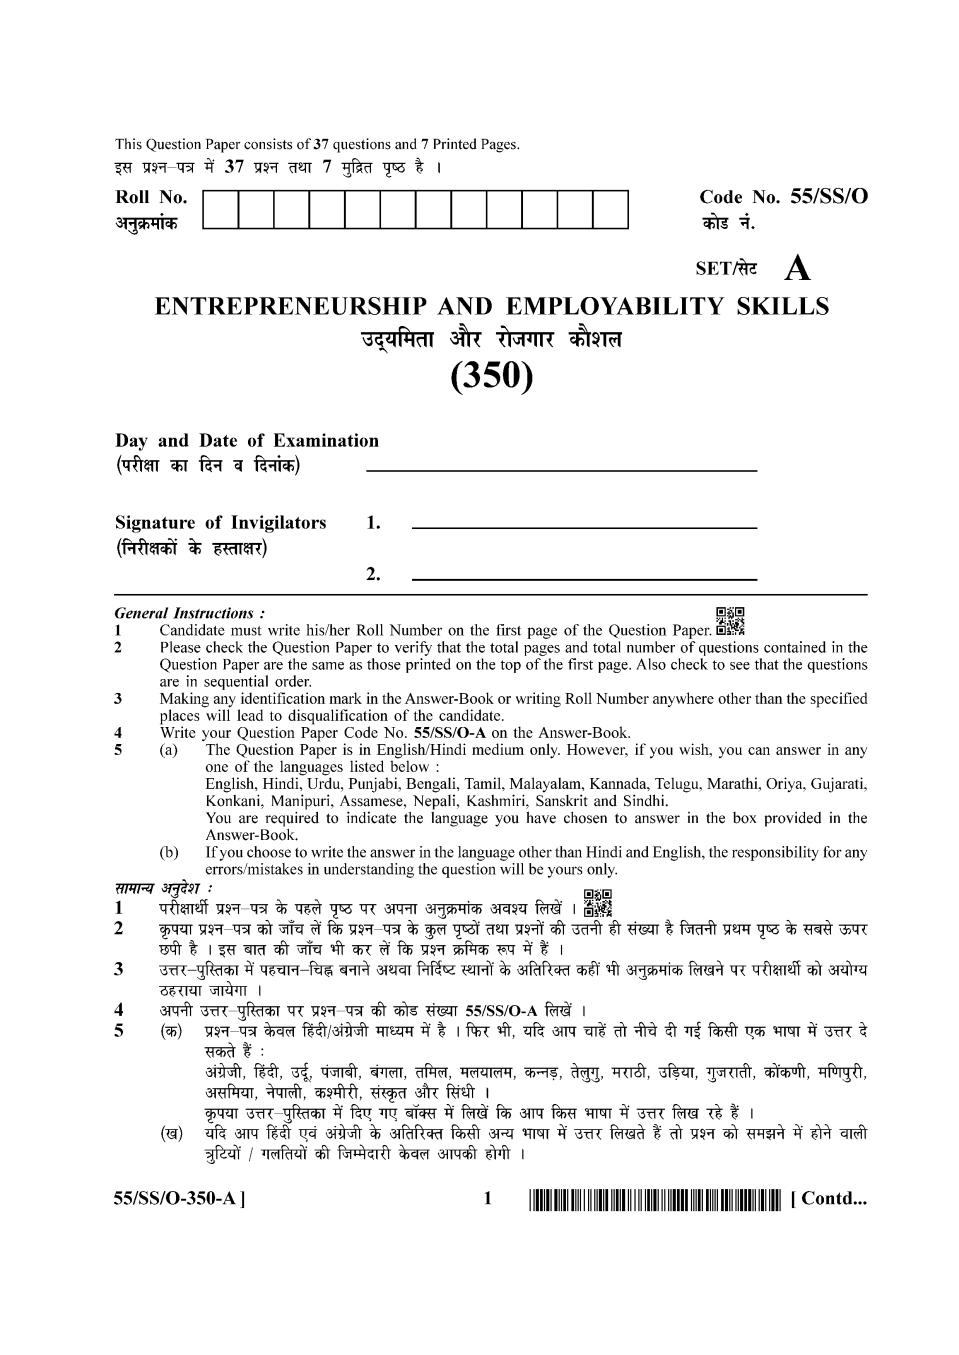 NIOS Class 12 Question Paper Oct 2017 - Entrepreneurship And Employability Skills - Page 1